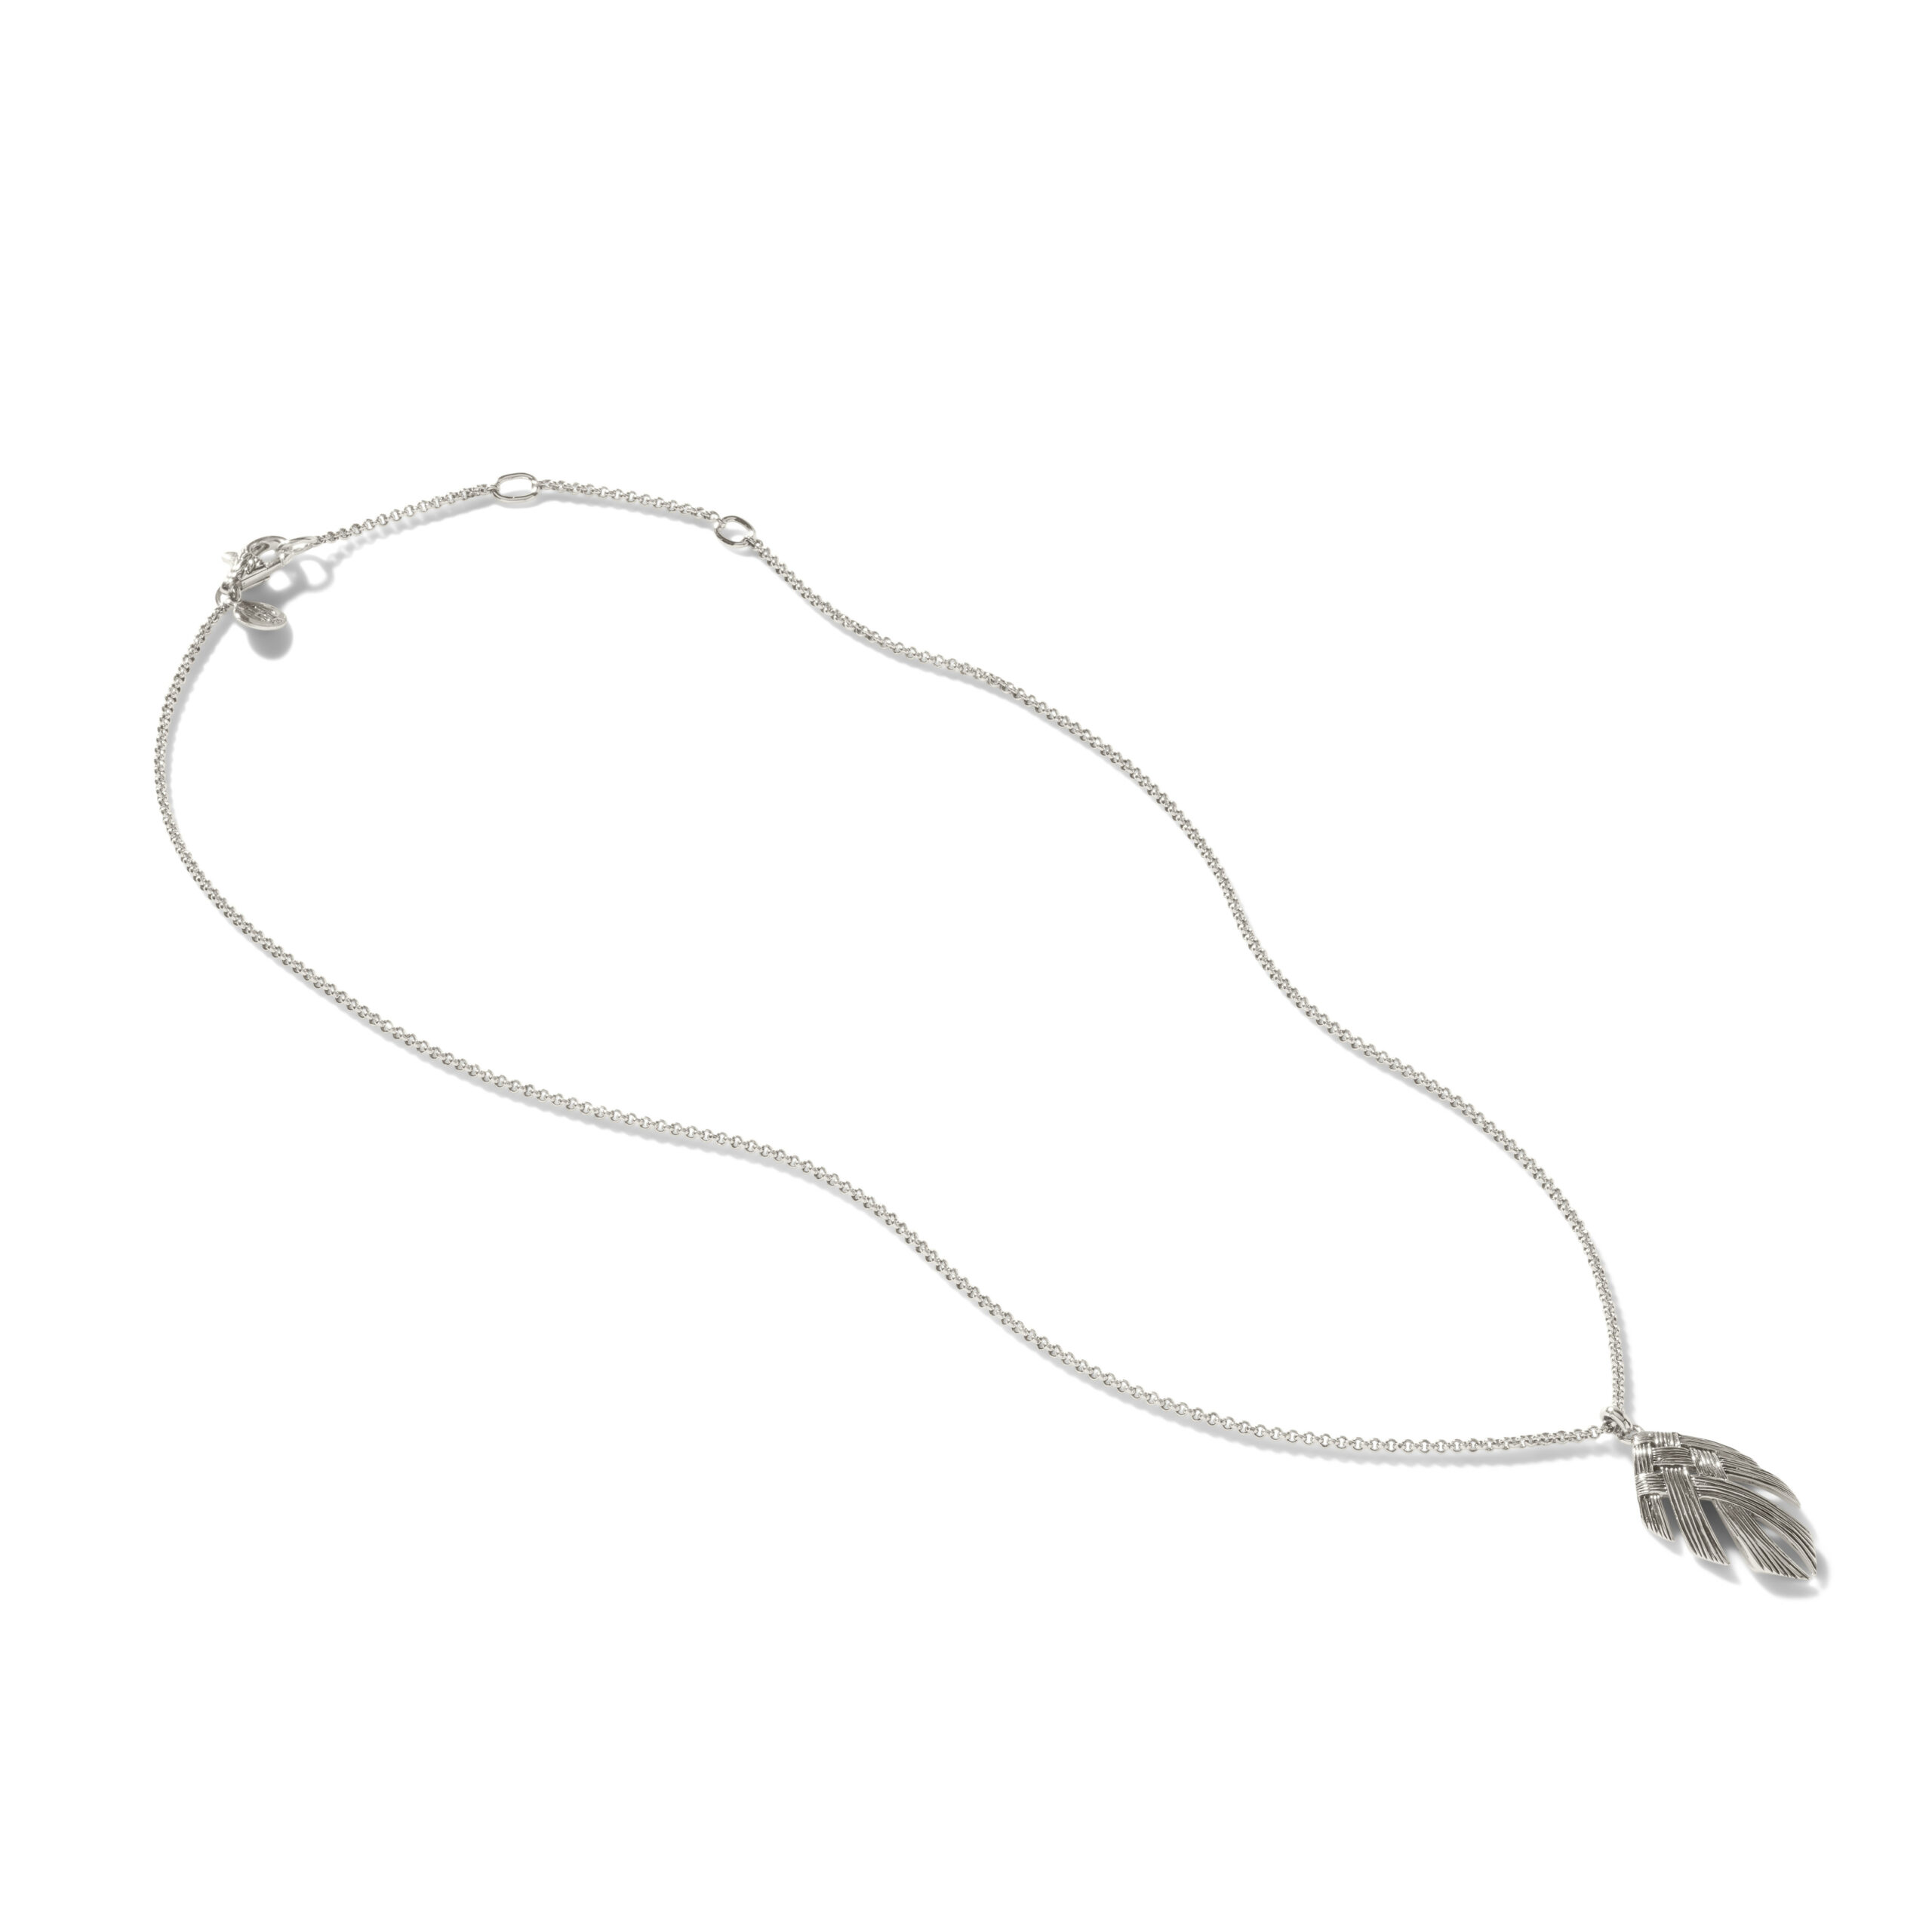 This necklace by John Hardy is crafted from sterling silver and features a woven pattern.